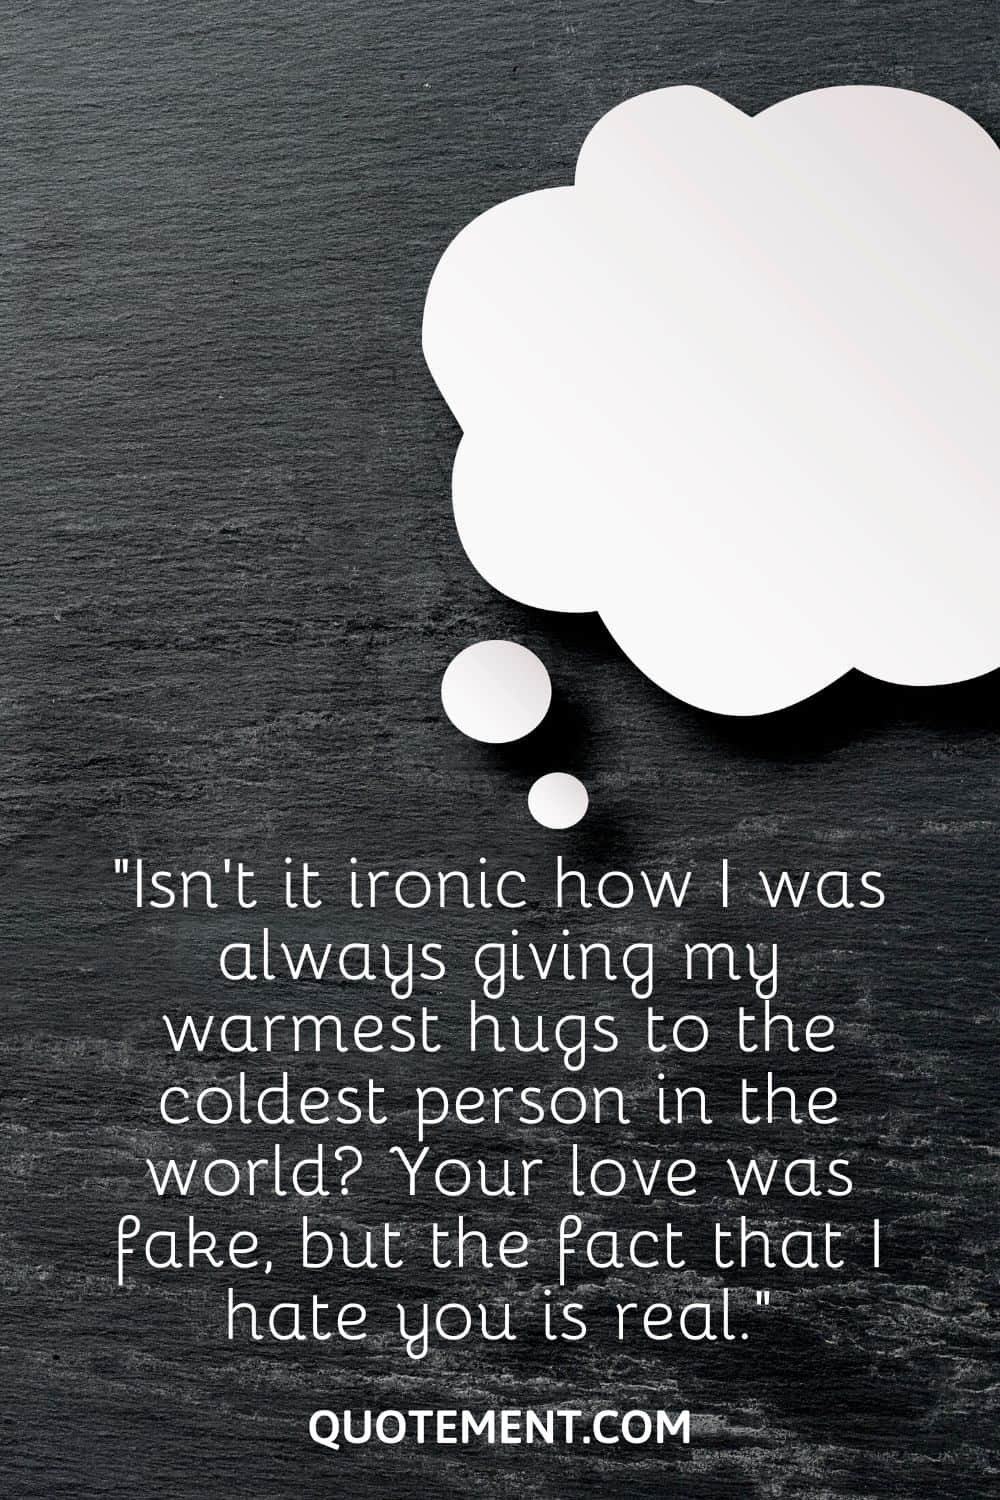 “Isn’t it ironic how I was always giving my warmest hugs to the coldest person in the world Your love was fake, but the fact that I hate you is real.“